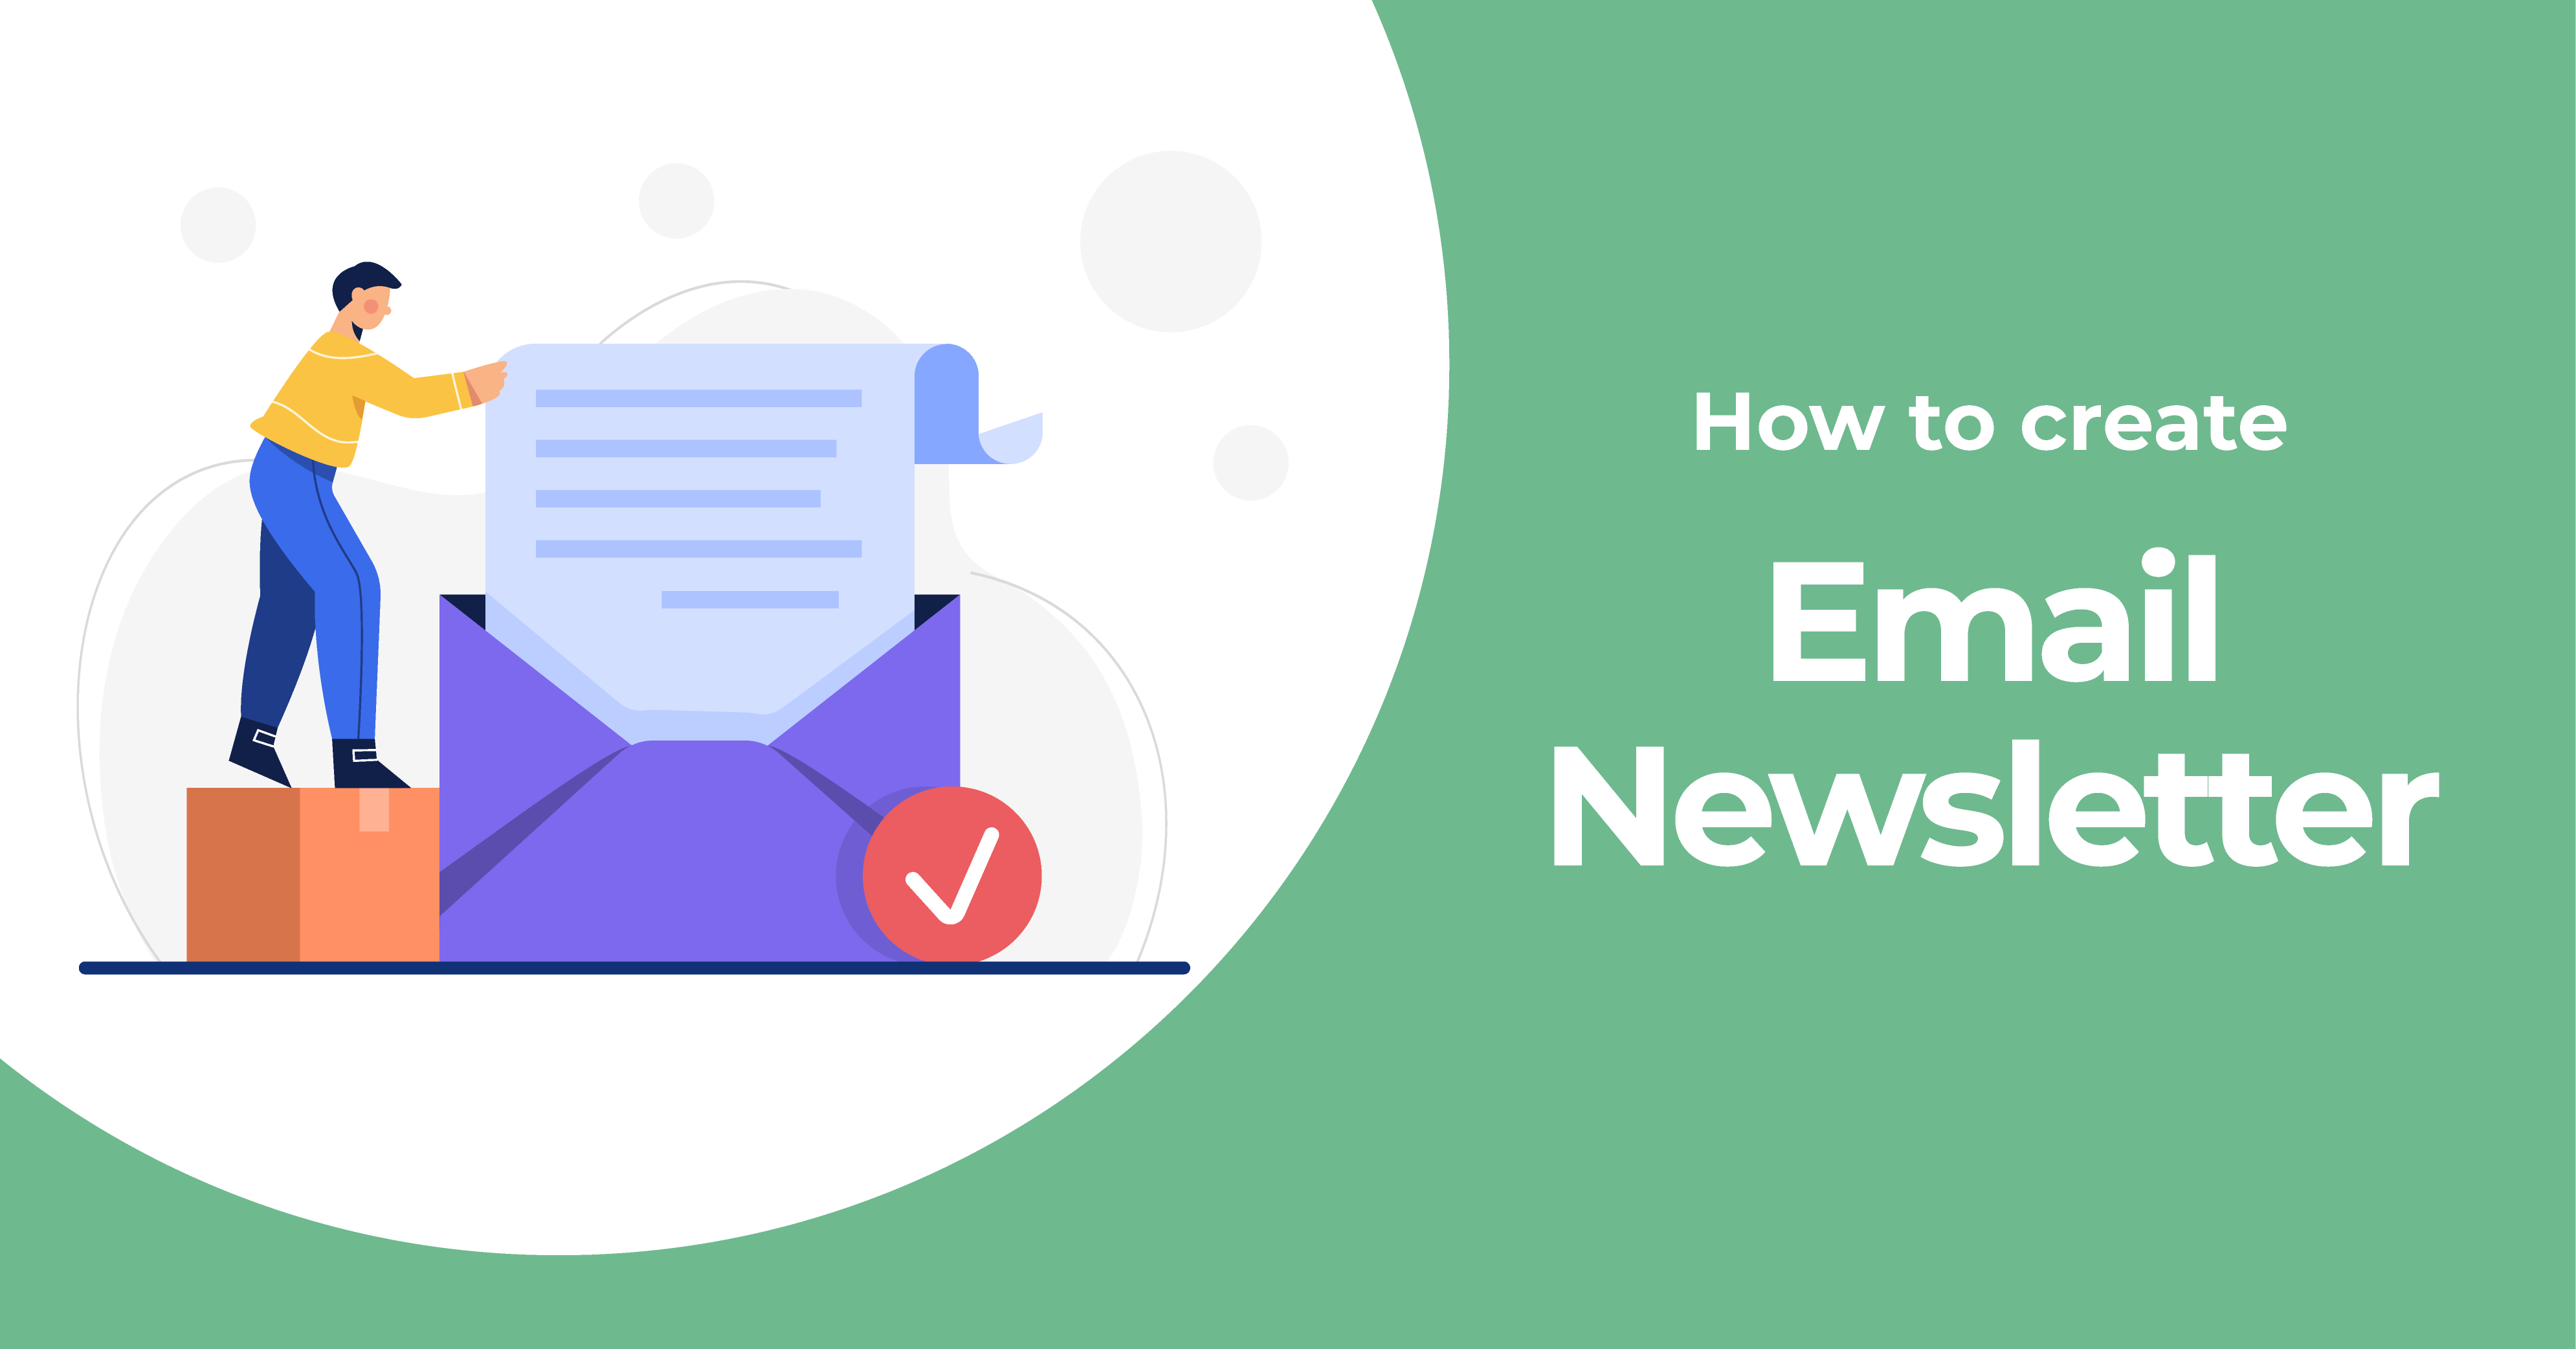 How to create an email newsletter